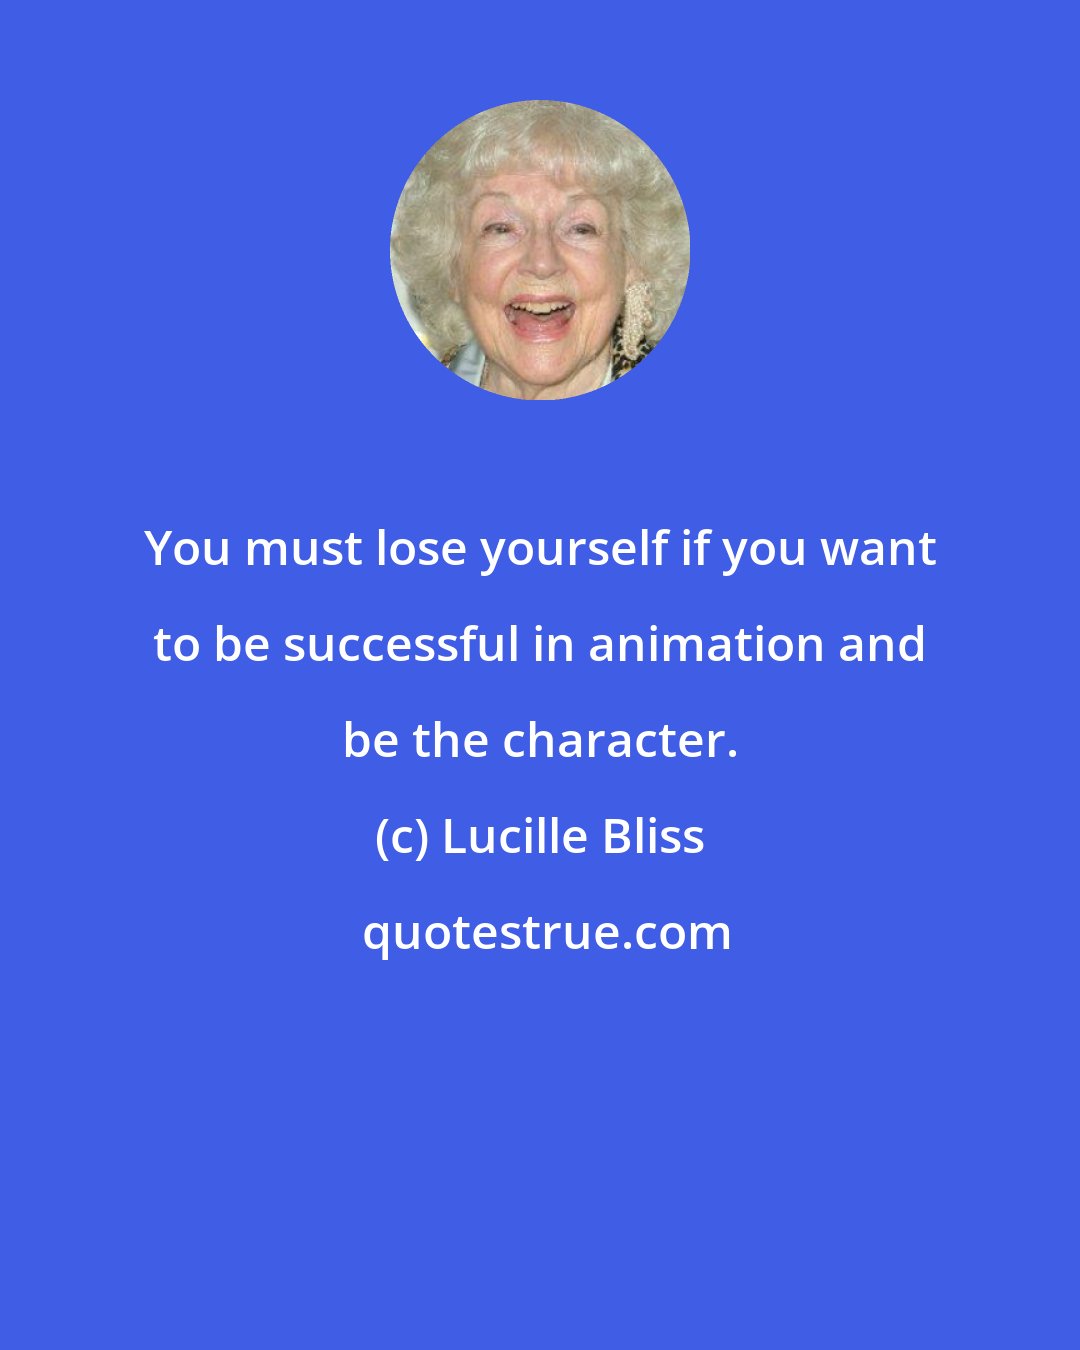 Lucille Bliss: You must lose yourself if you want to be successful in animation and be the character.